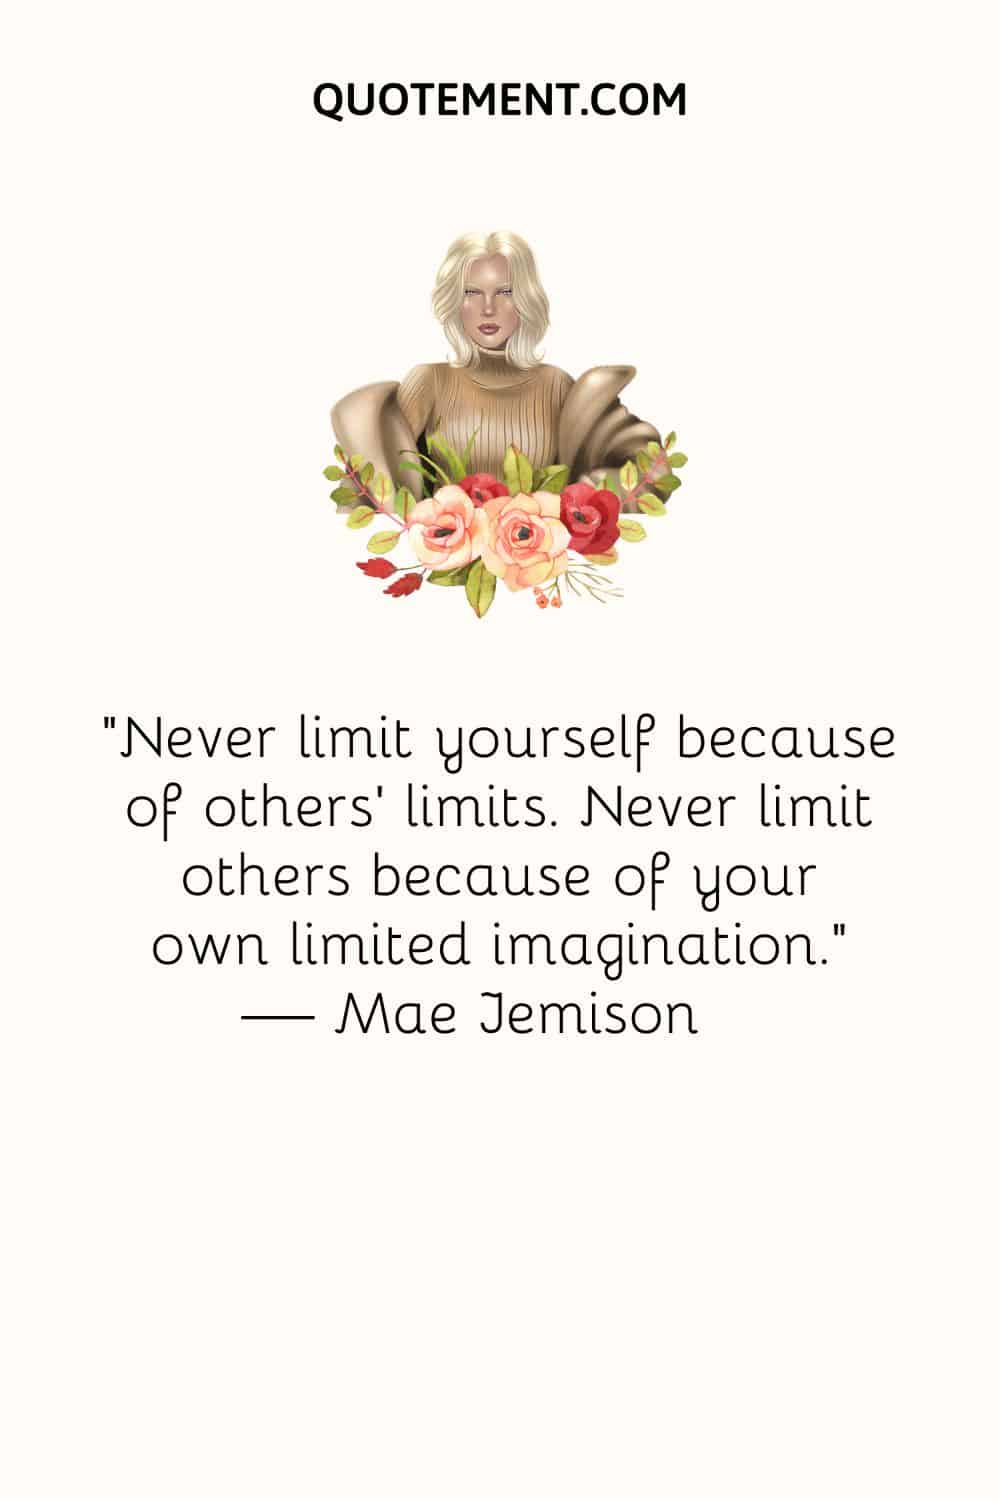 Never limit yourself because of others’ limits